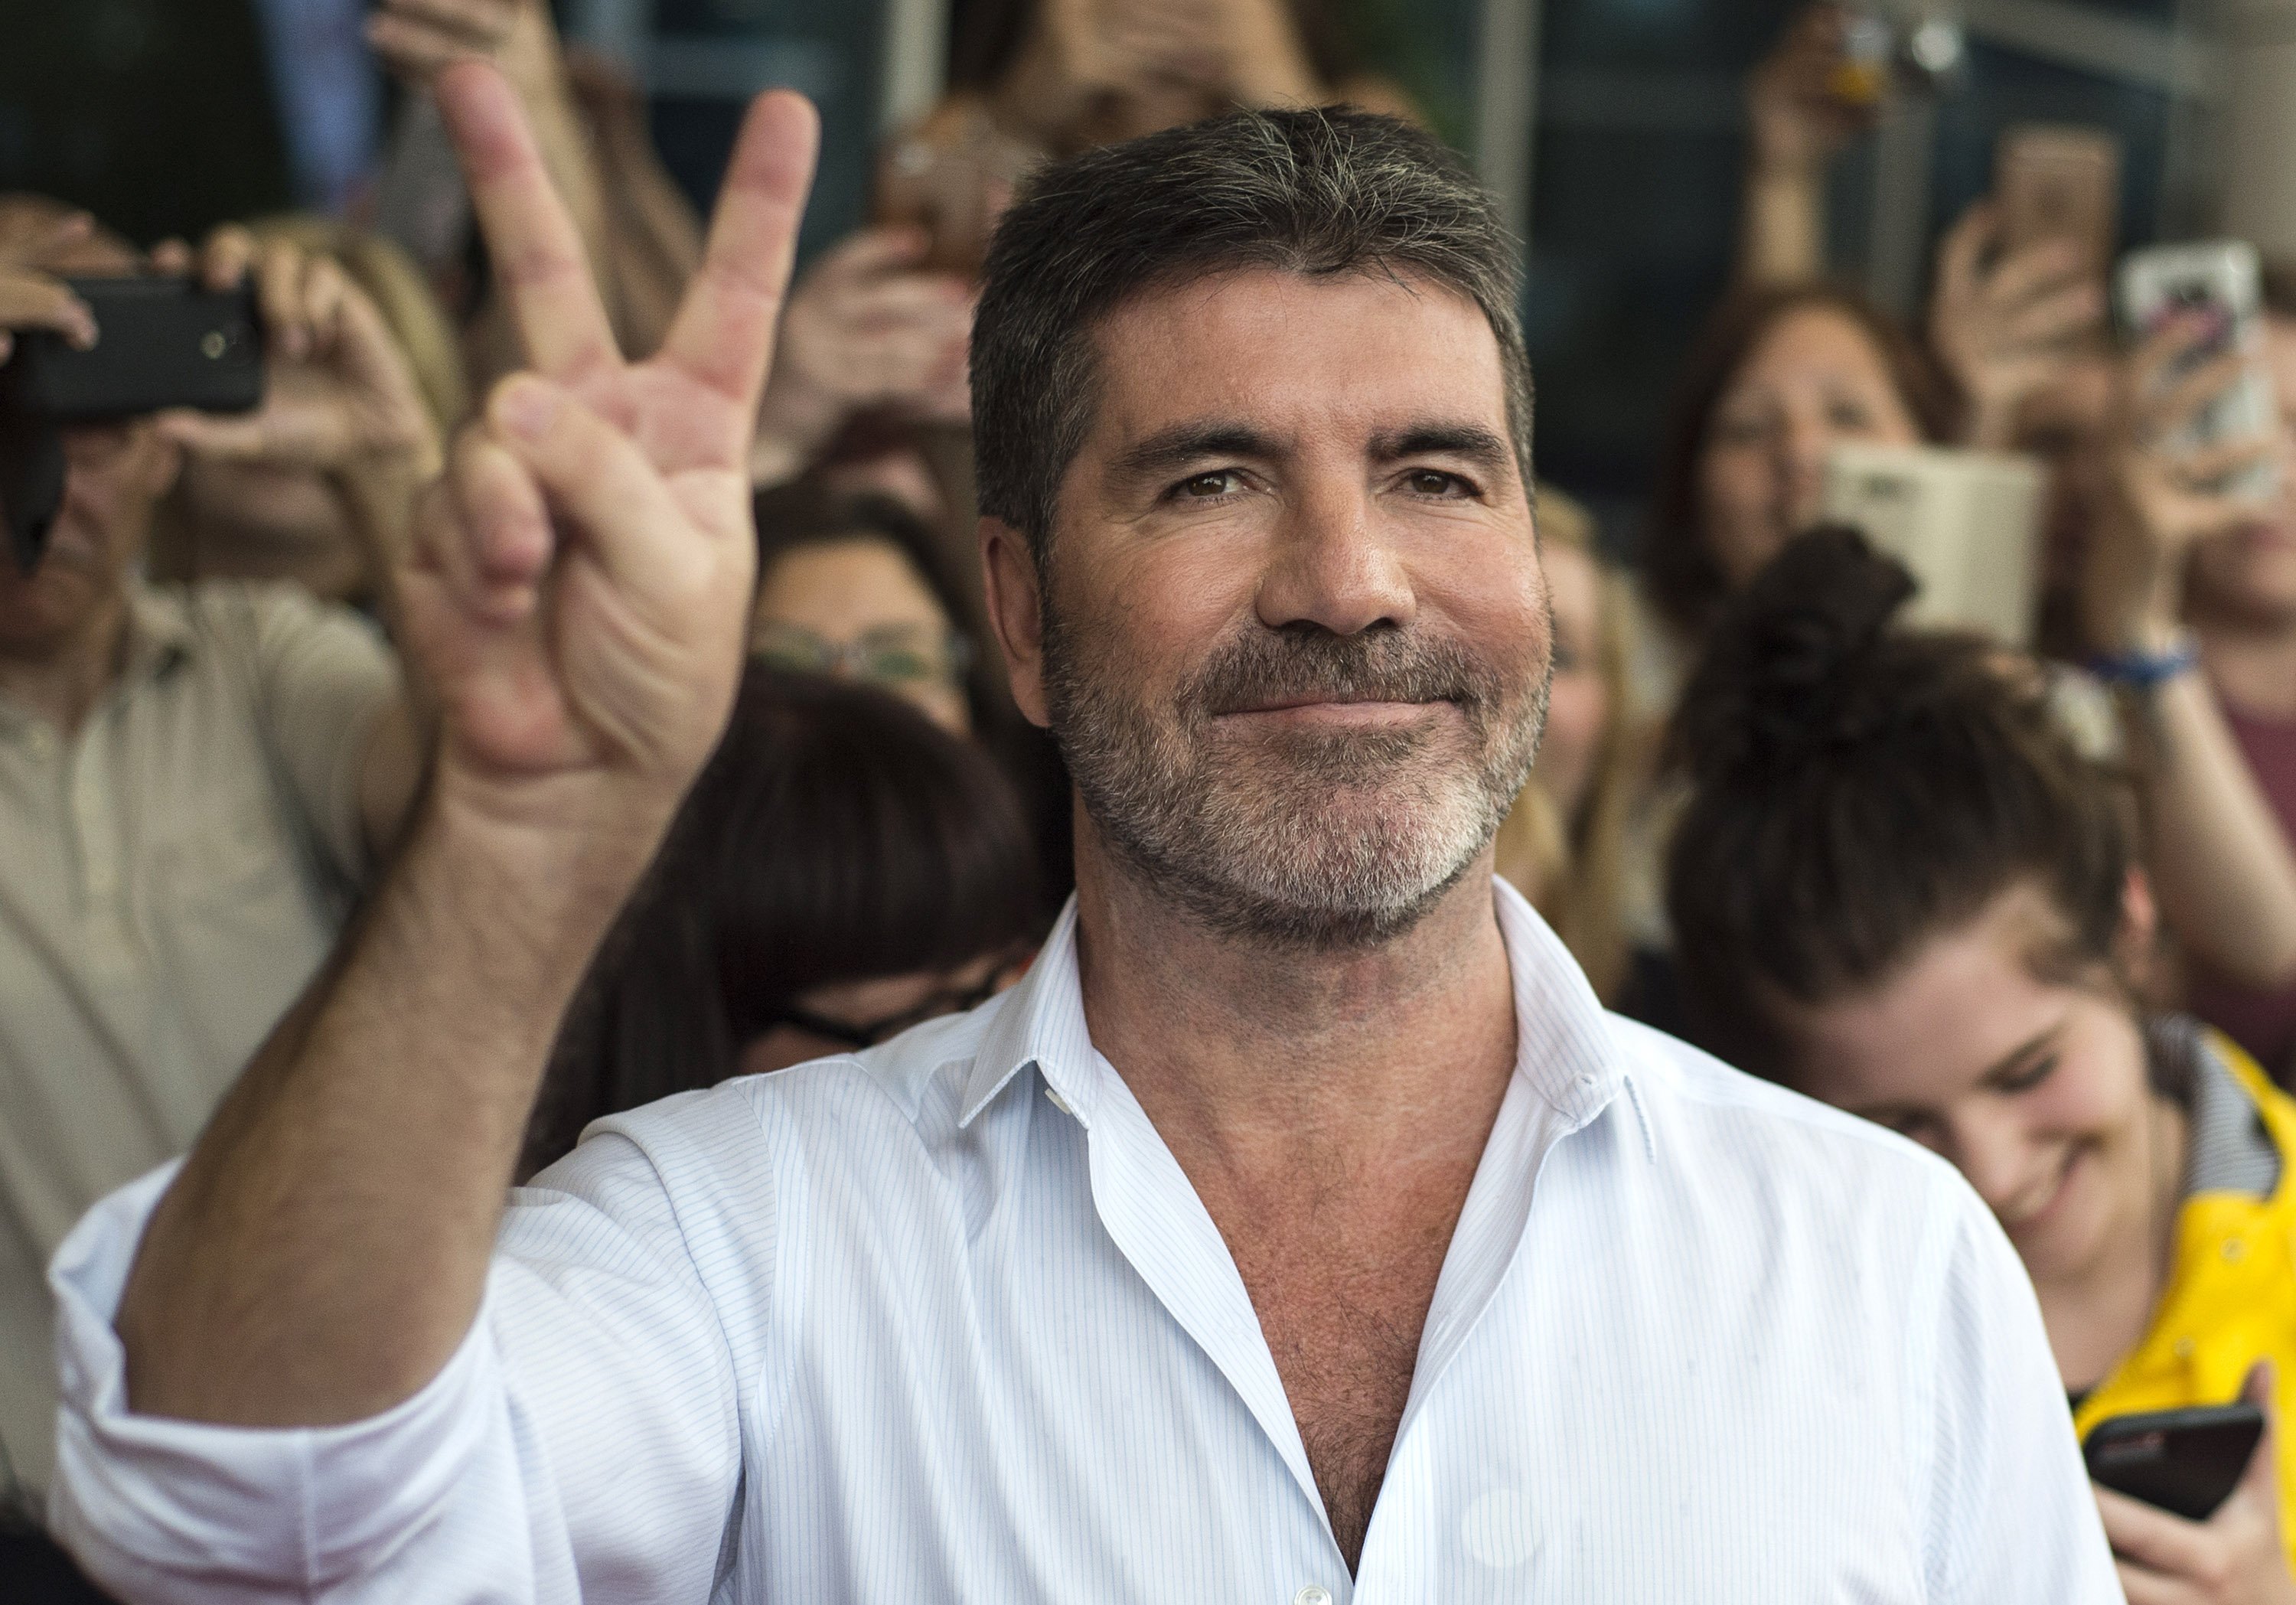 Simon Cowell arrives for X Factor auditions in Leicester, UK on June 10, 2016 | Photo: Getty Images